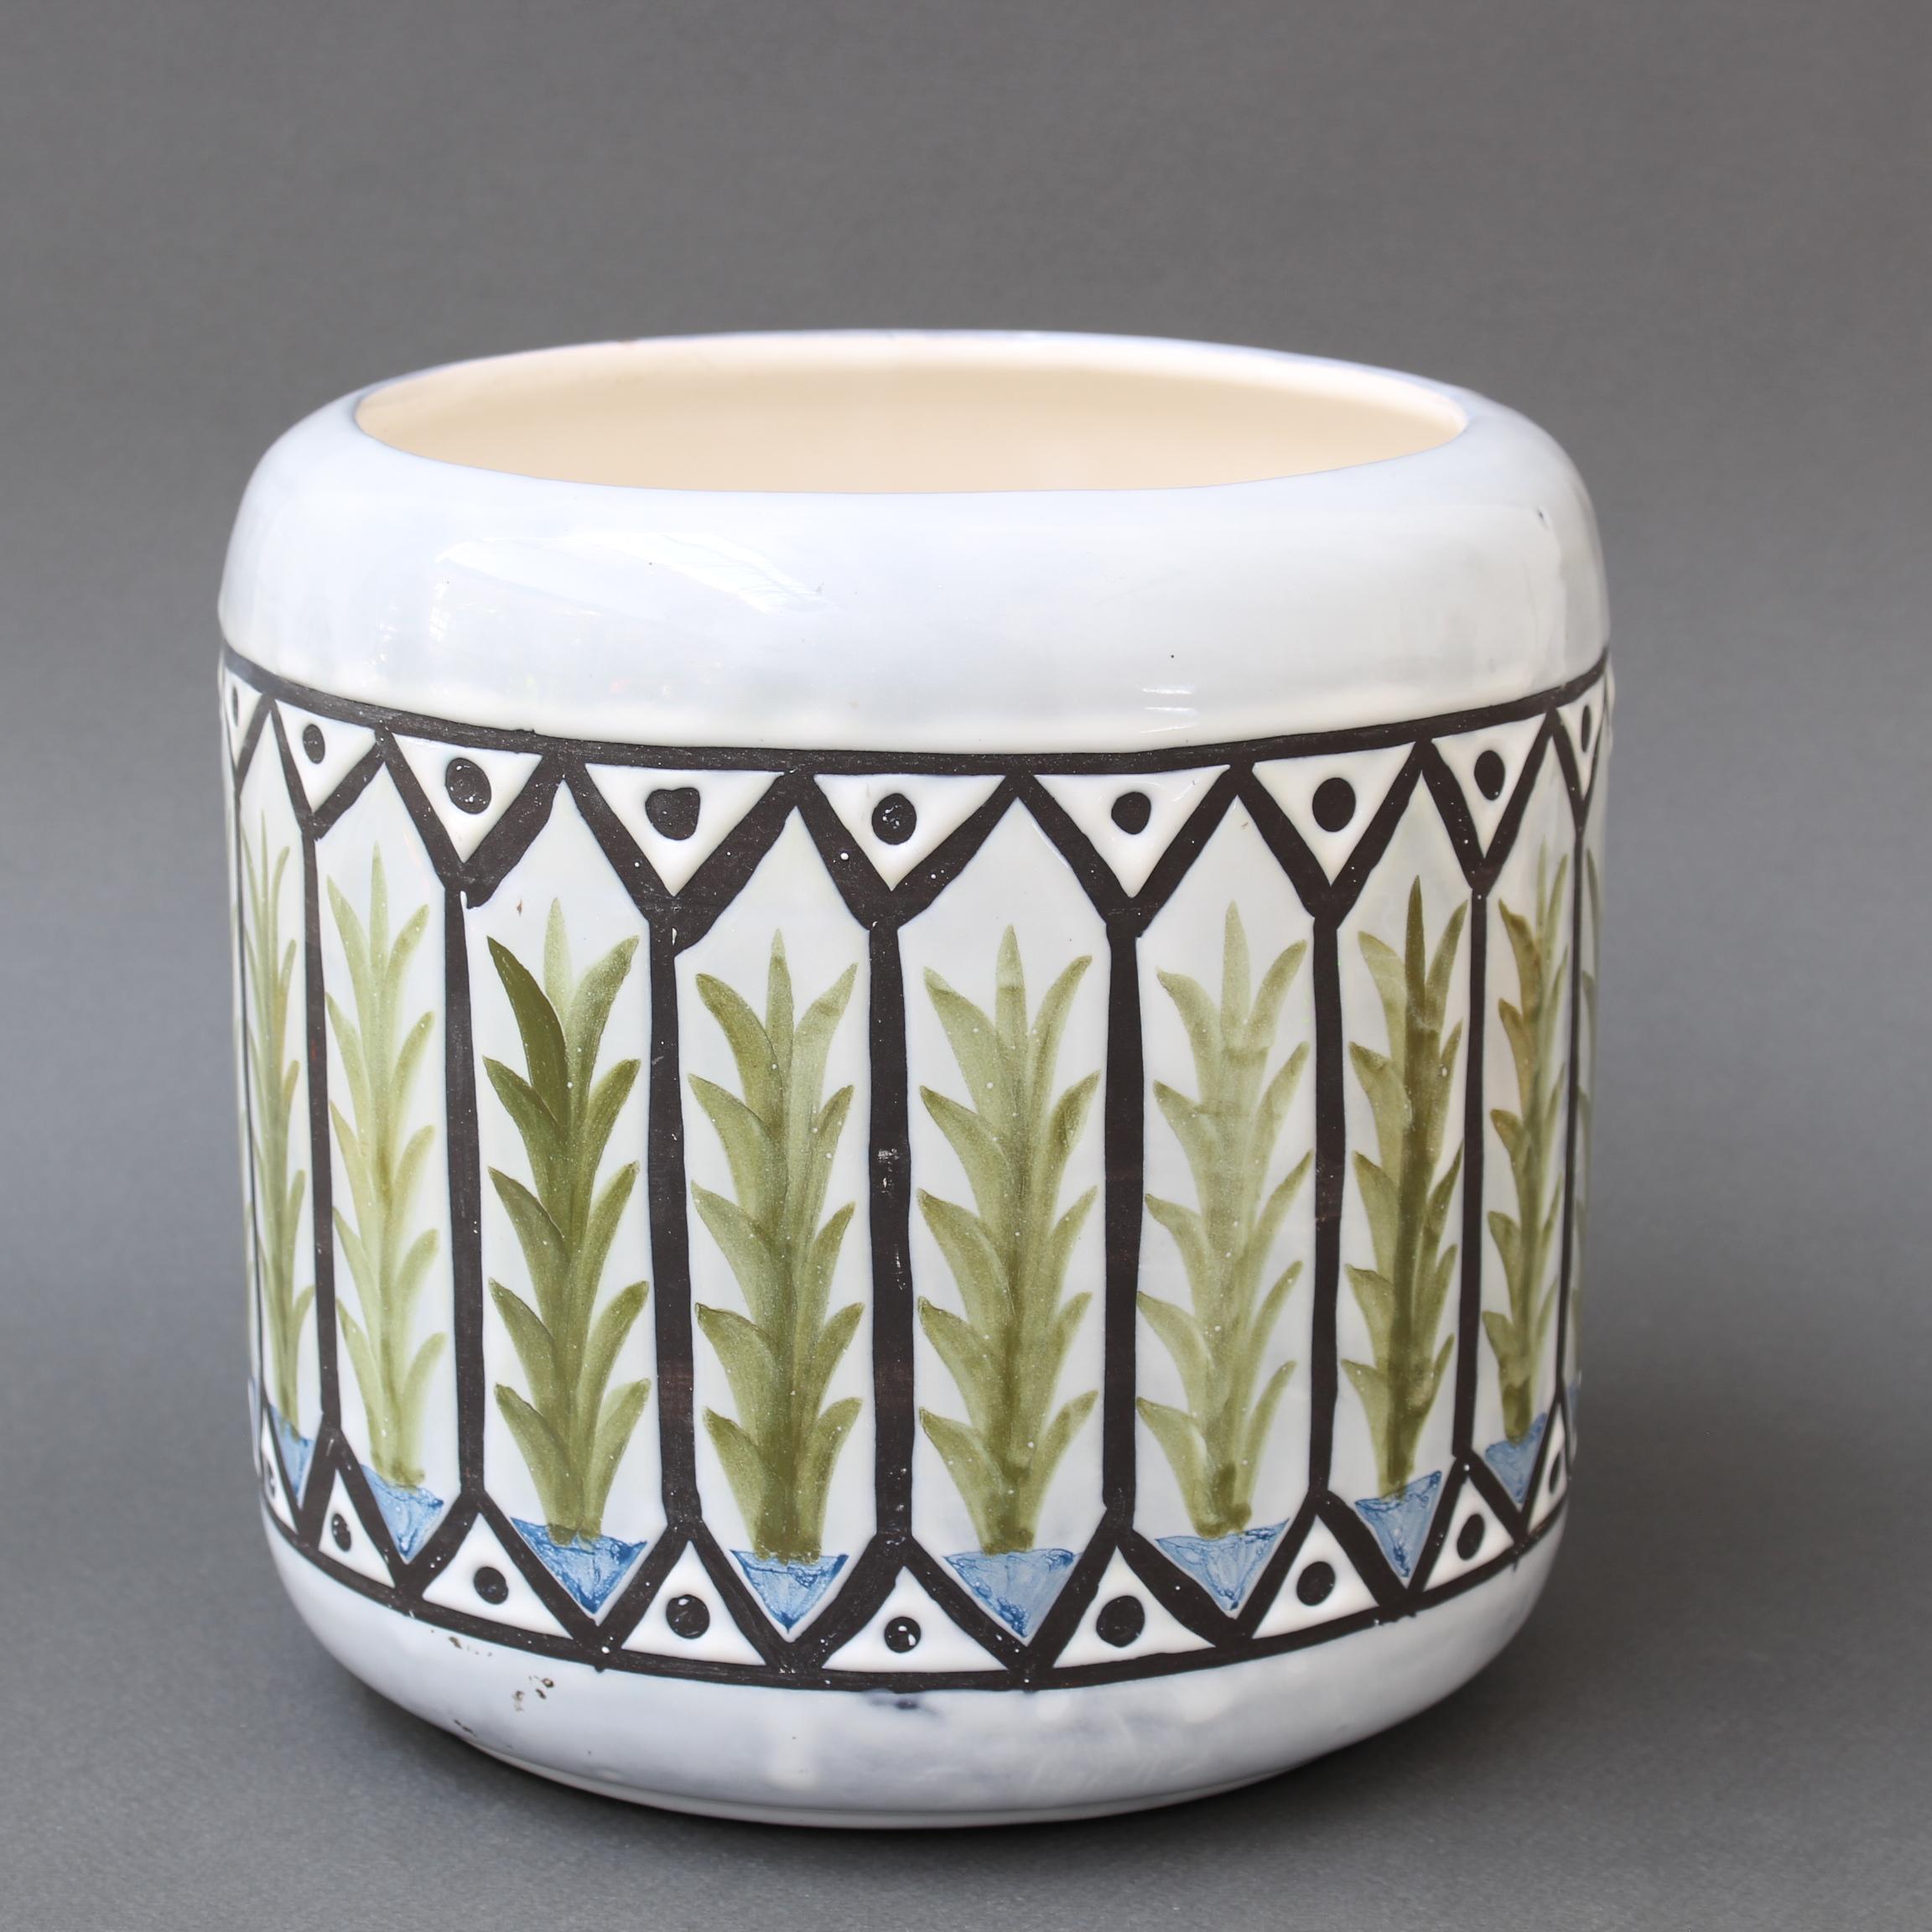 Vintage French ceramic cachepot by Roger Capron (circa 1970s). A charming Provençal style cover pot presents a surrounding band with repeating plant motif and geometric shapes. There is a hint of blue above and below the decorative band. The pot is